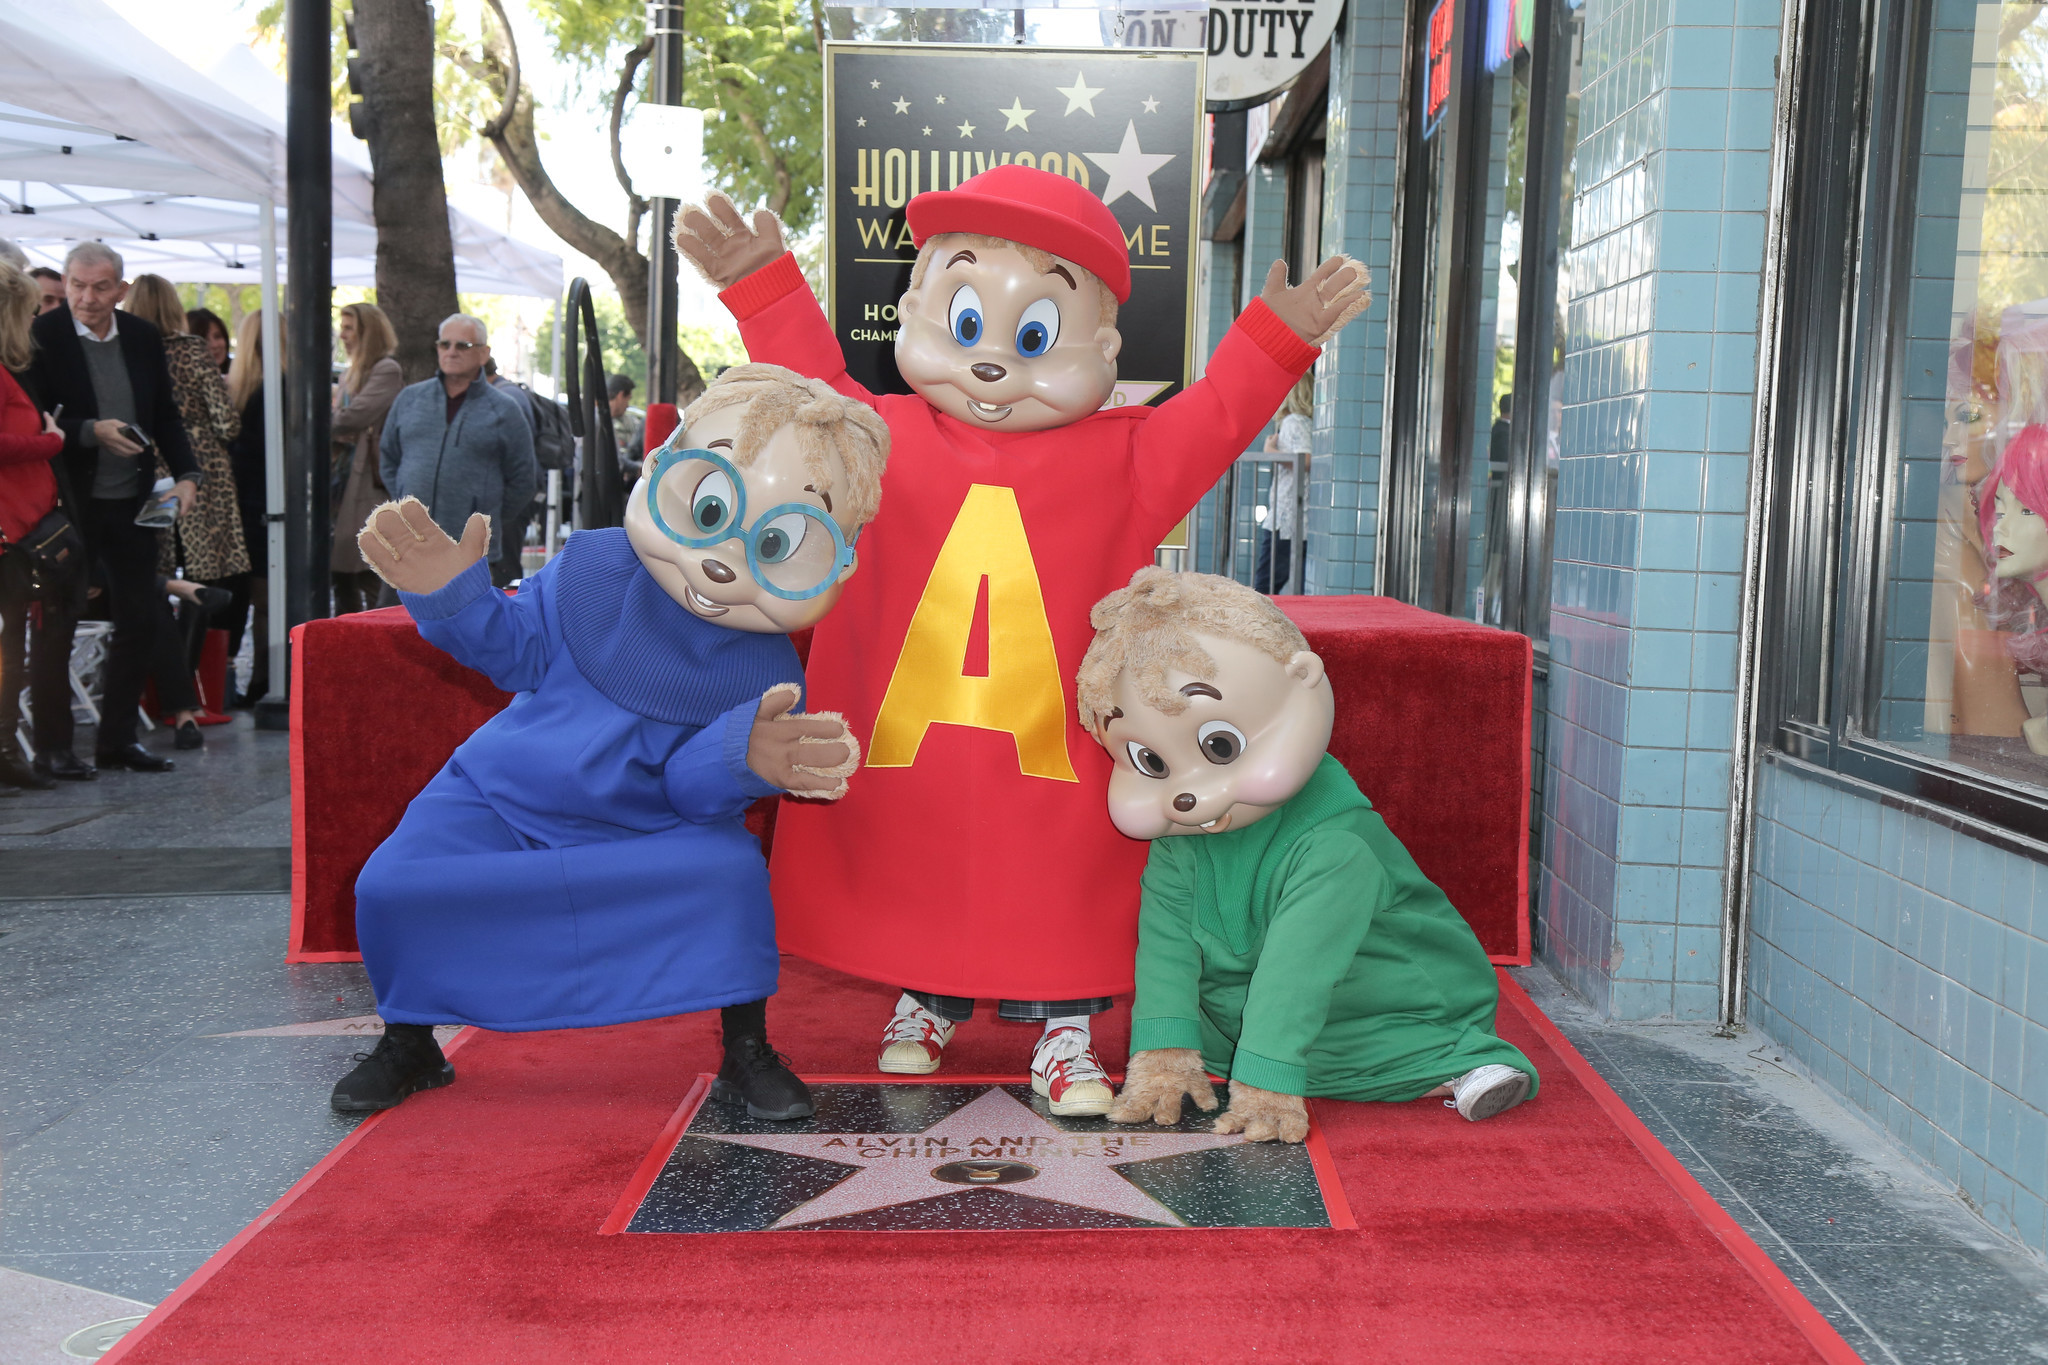 From left to right, Simon, Alvin and Theodore Seville pose next to their new star on the Hollywood Walk of Fame on Mar. 14, 2019. The unveiling of the star is part of the furry Grammy-winning singing group's 60th anniversary.